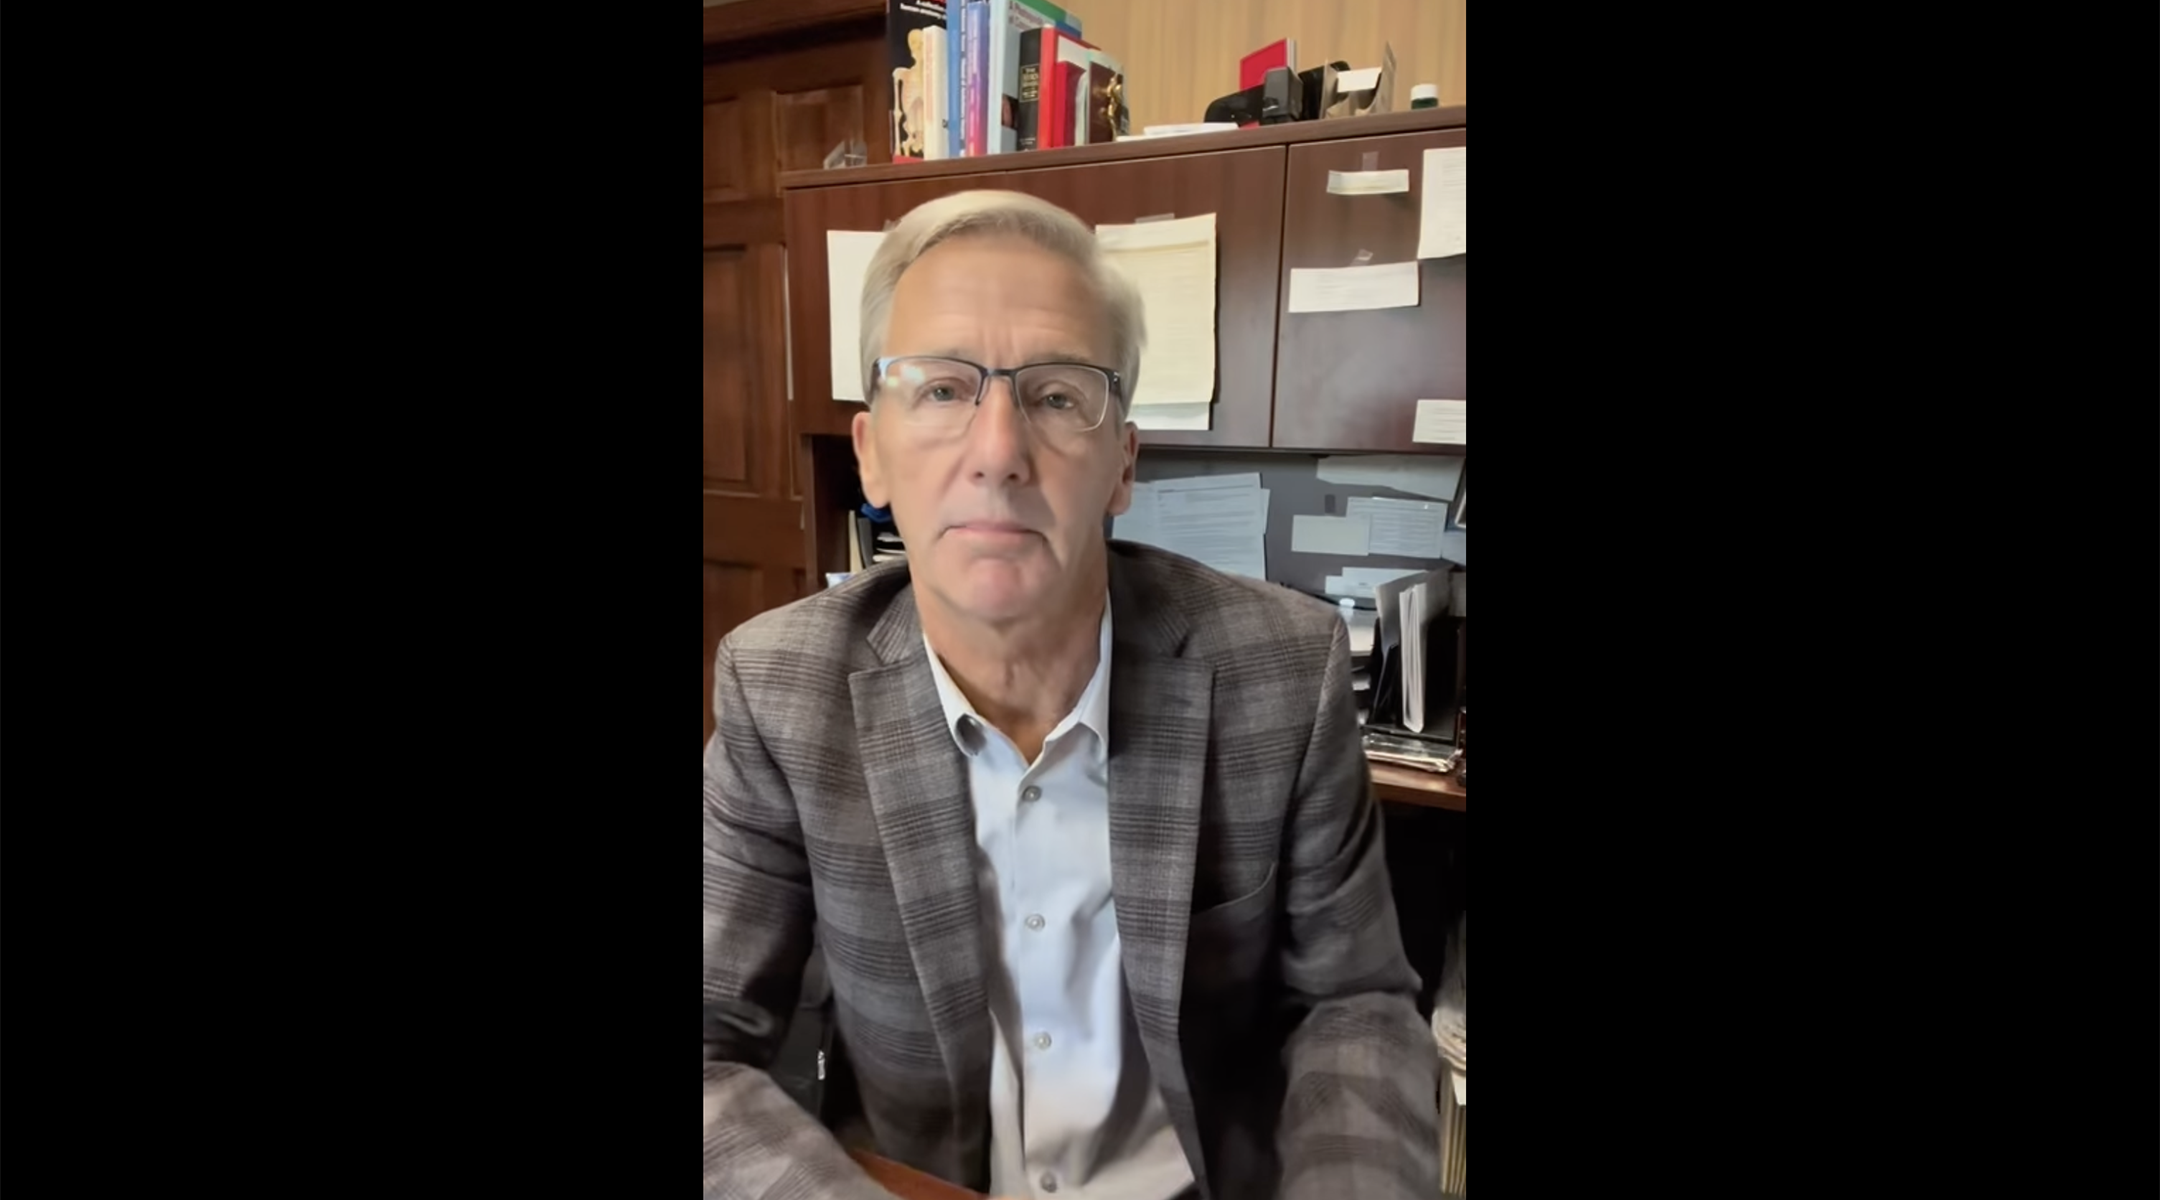 Scott Jensen, the 2022 Republican nominee for governor of Minnesota, addresses criticism for comparing COVID-19 mask mandates to Krystallnacht in a Facebook video, Aug. 23, 2022. (Screenshot)